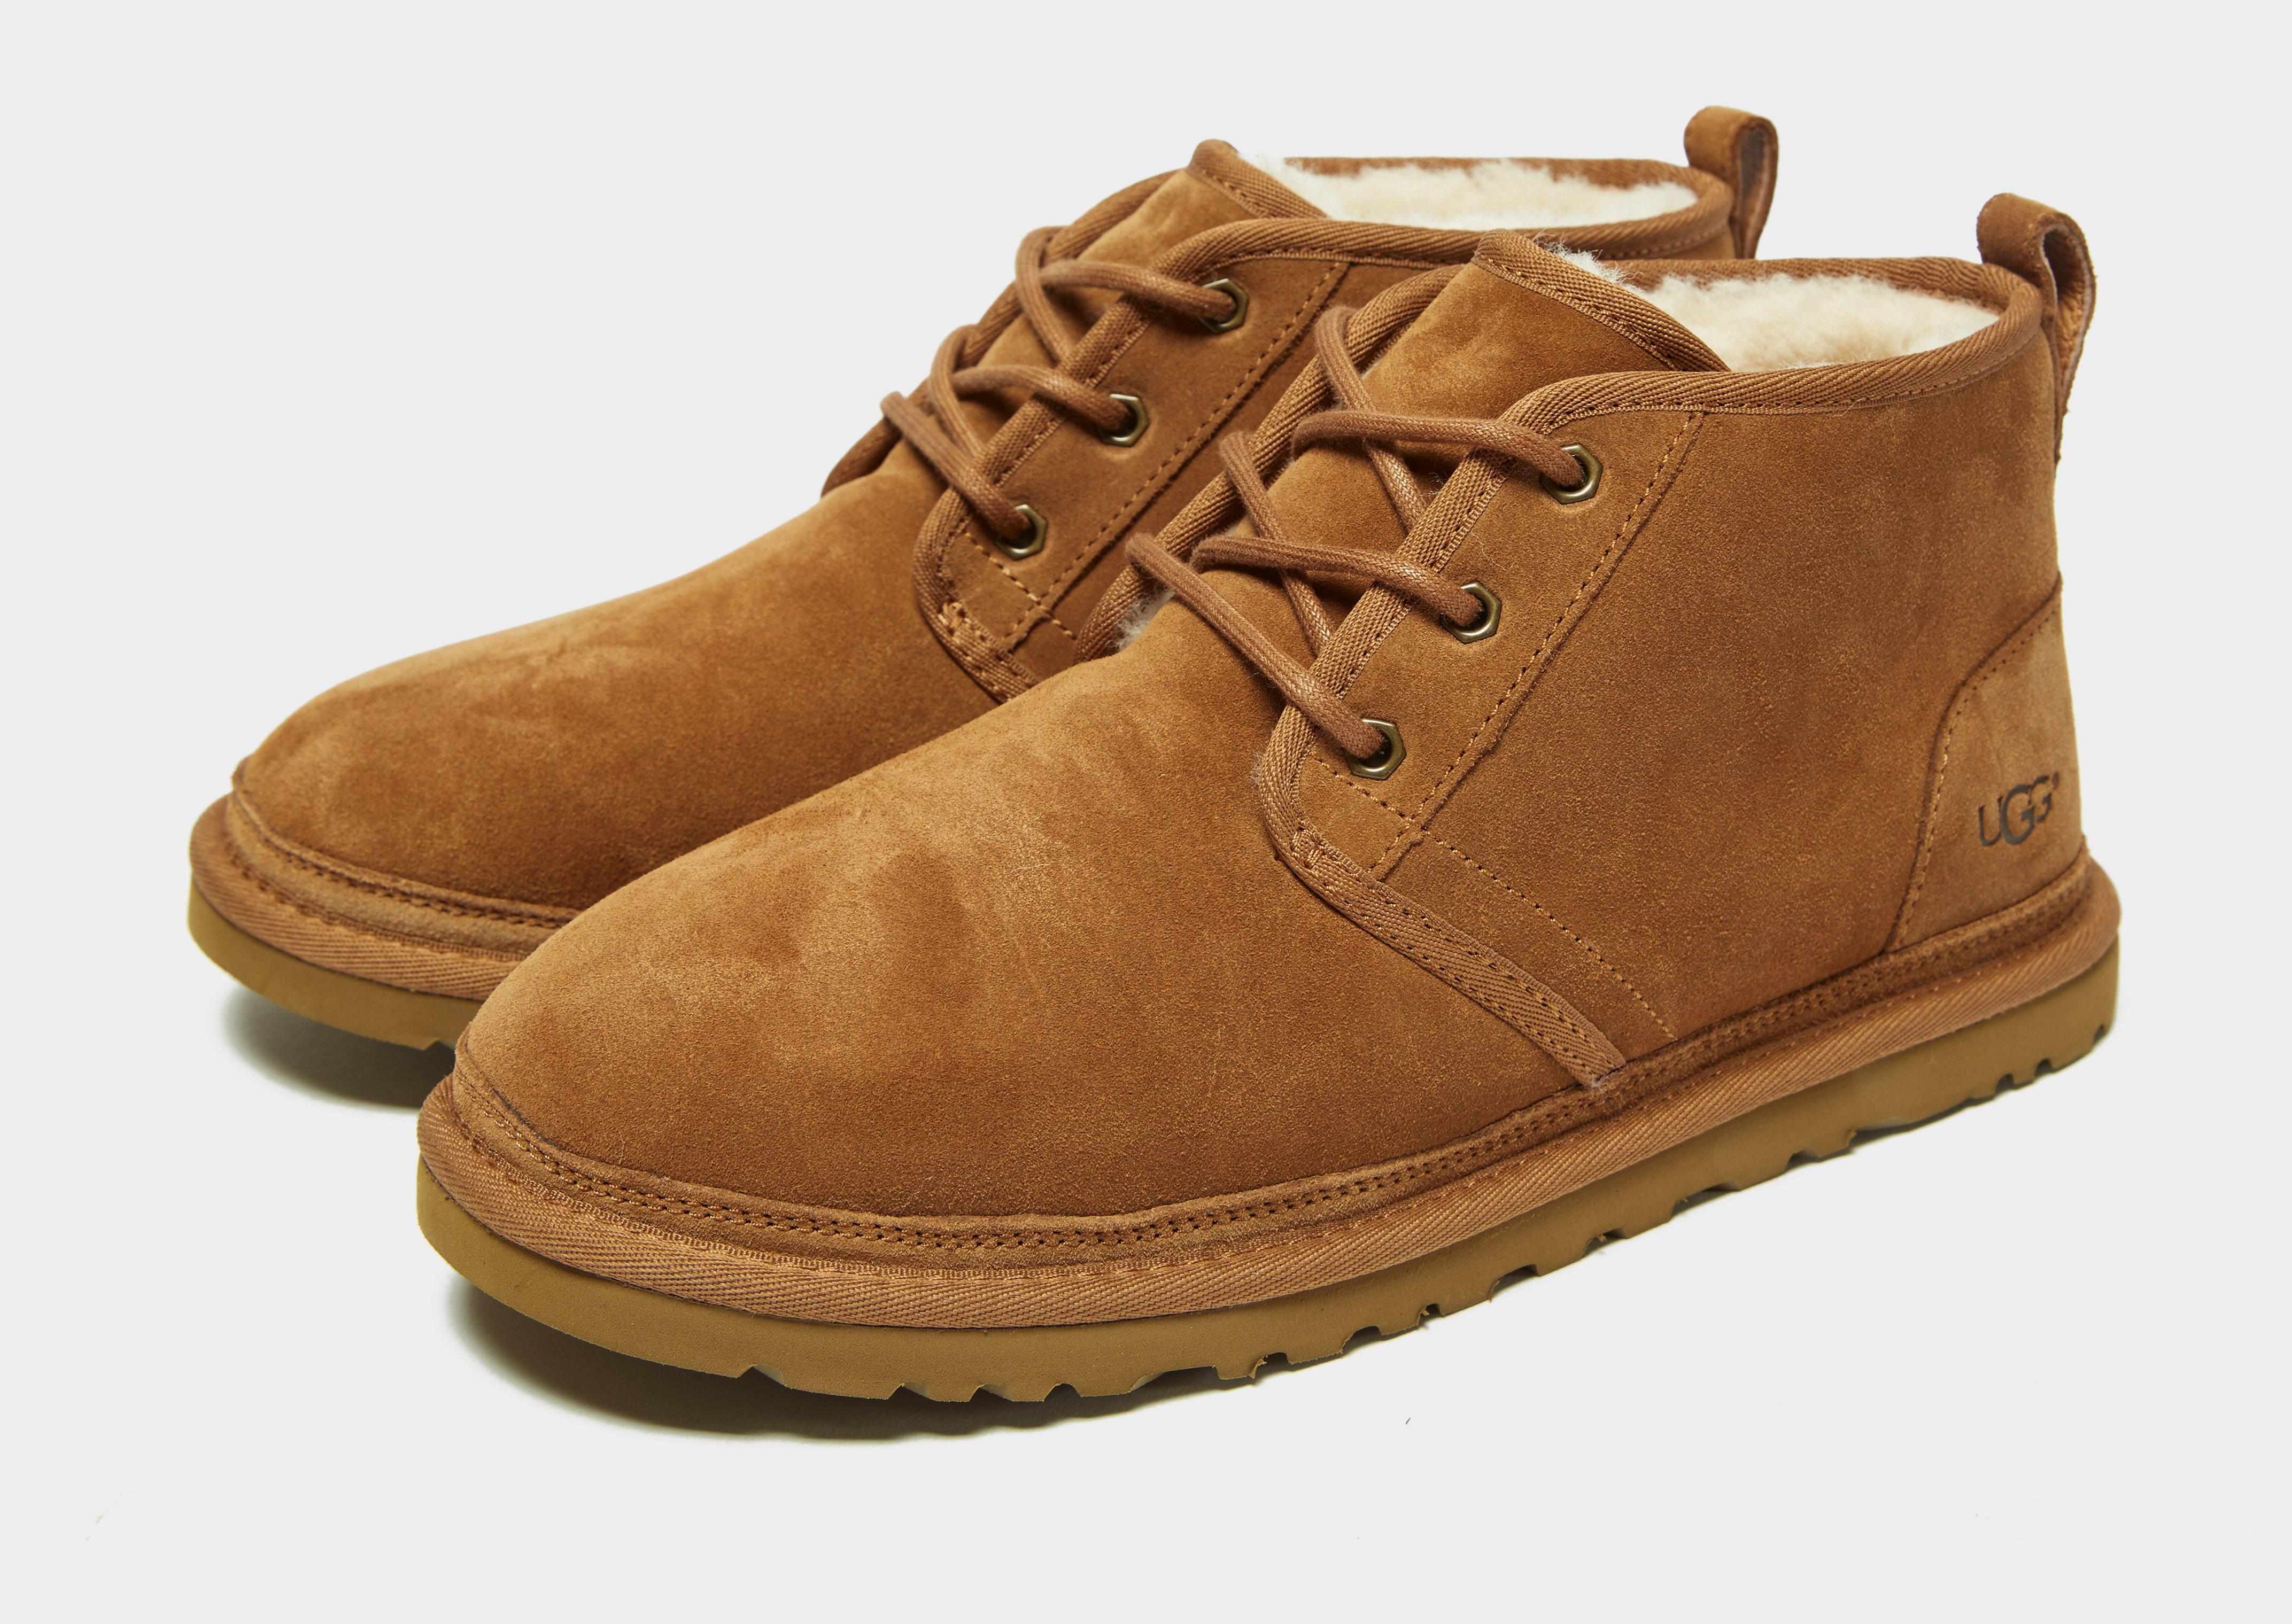 Buy > ugg boots jd sports > in stock